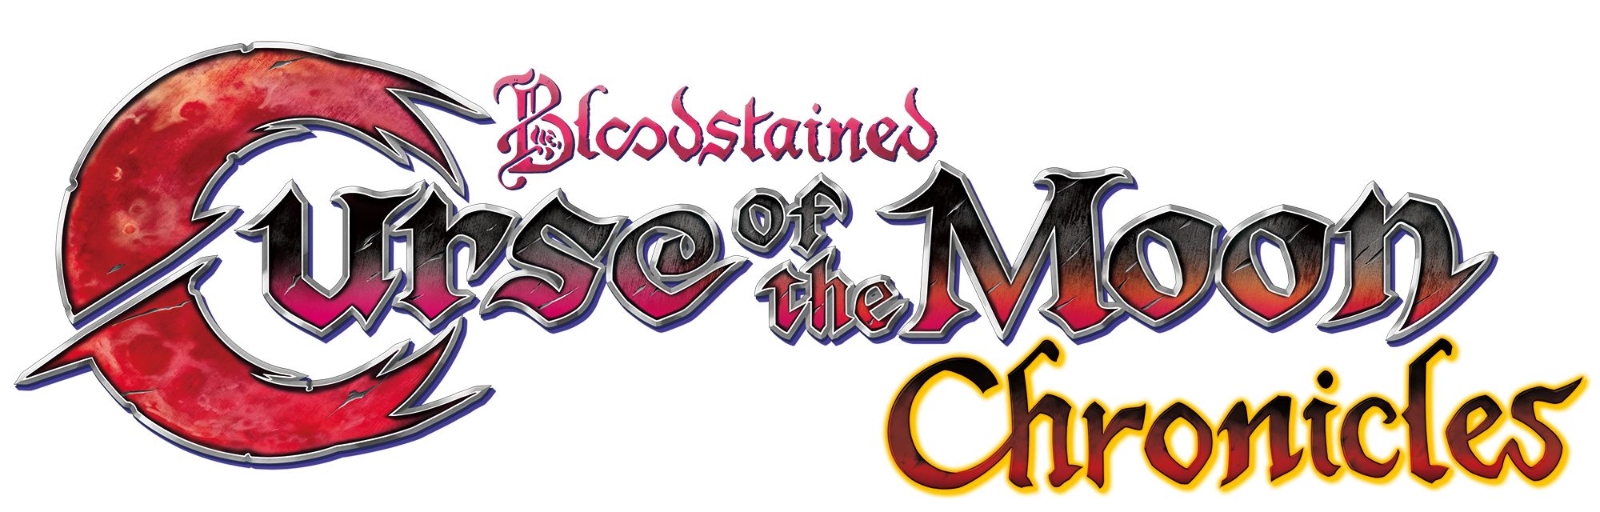 Bloodstained: Curse of the Moon Chronicles　限定版 PS4版画像